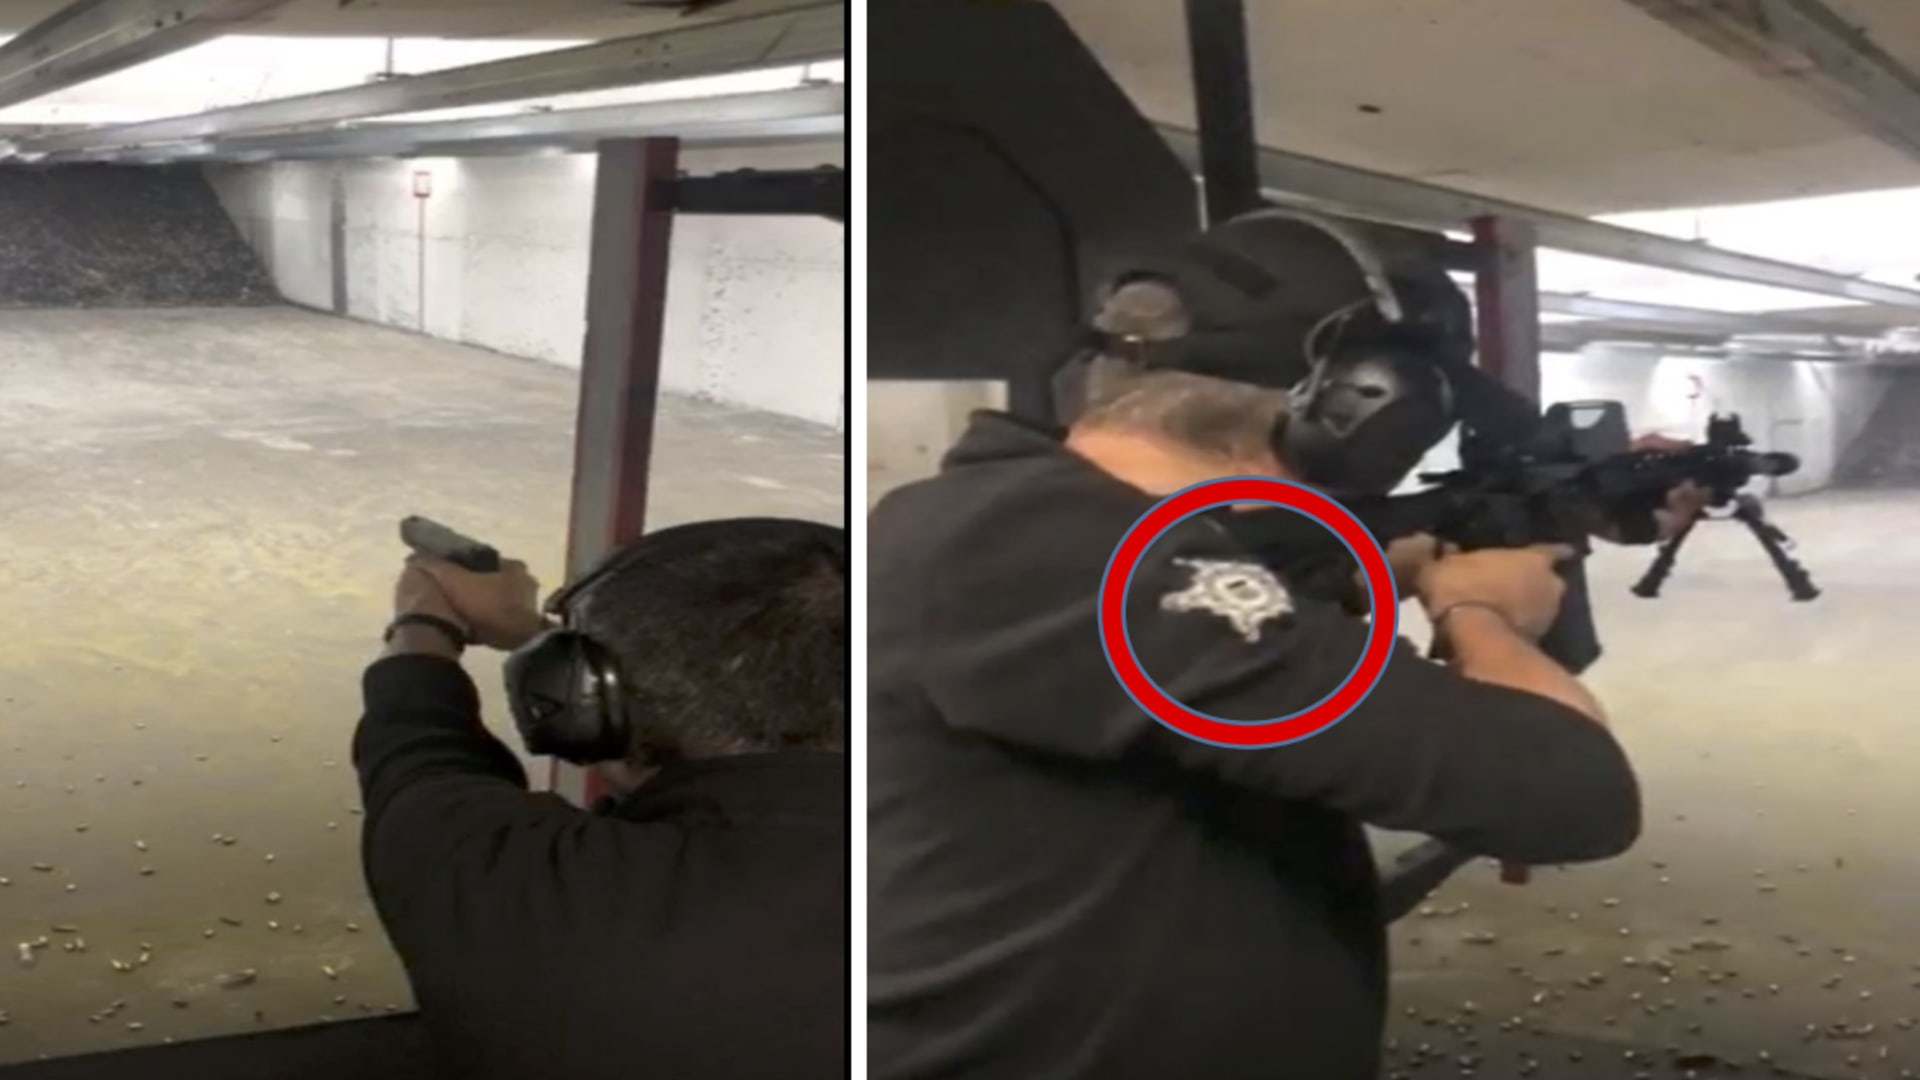 Law enforcement has obtained two videos of Taherzadeh shooting a handgun and assault rifle at a shooting range believed to be in Northern Virginia. In one video, Taherzadeh appears to be wearing a long sleeve shirt with a USSS insignia on the arm. A